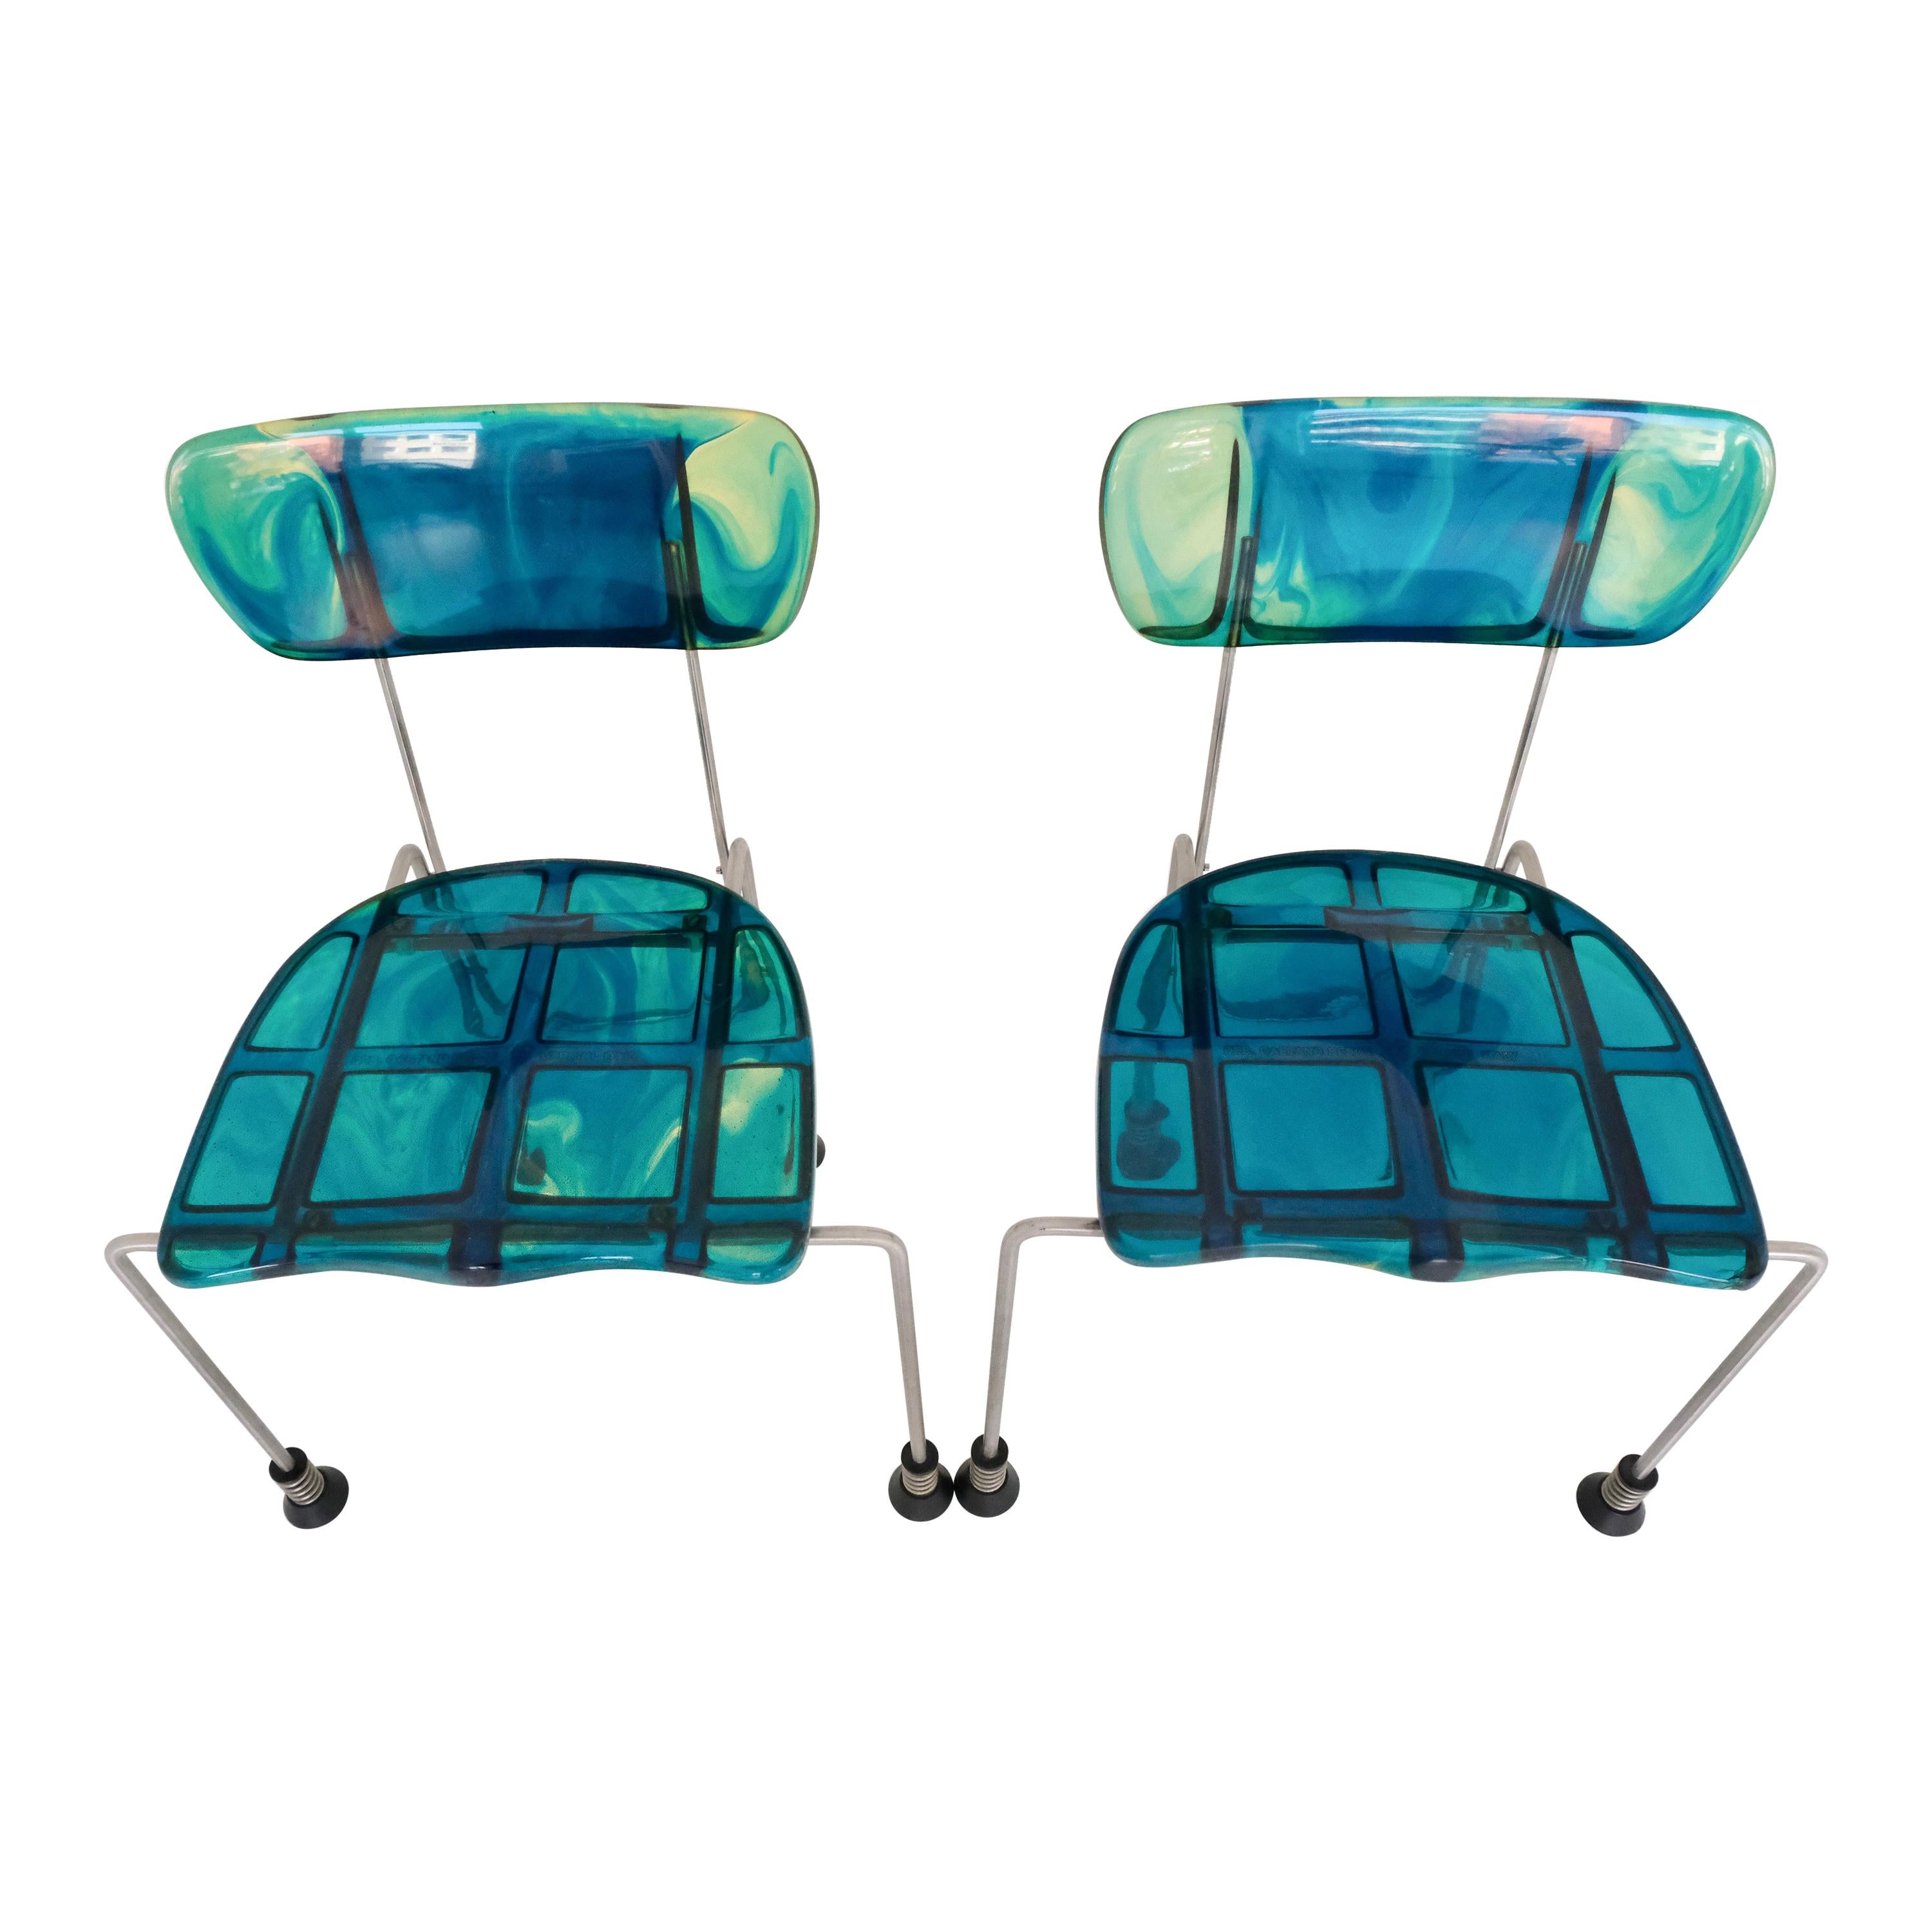 Pair of Broadway Chairs by Gaetano Pesce for Bernini, Italy, 1993